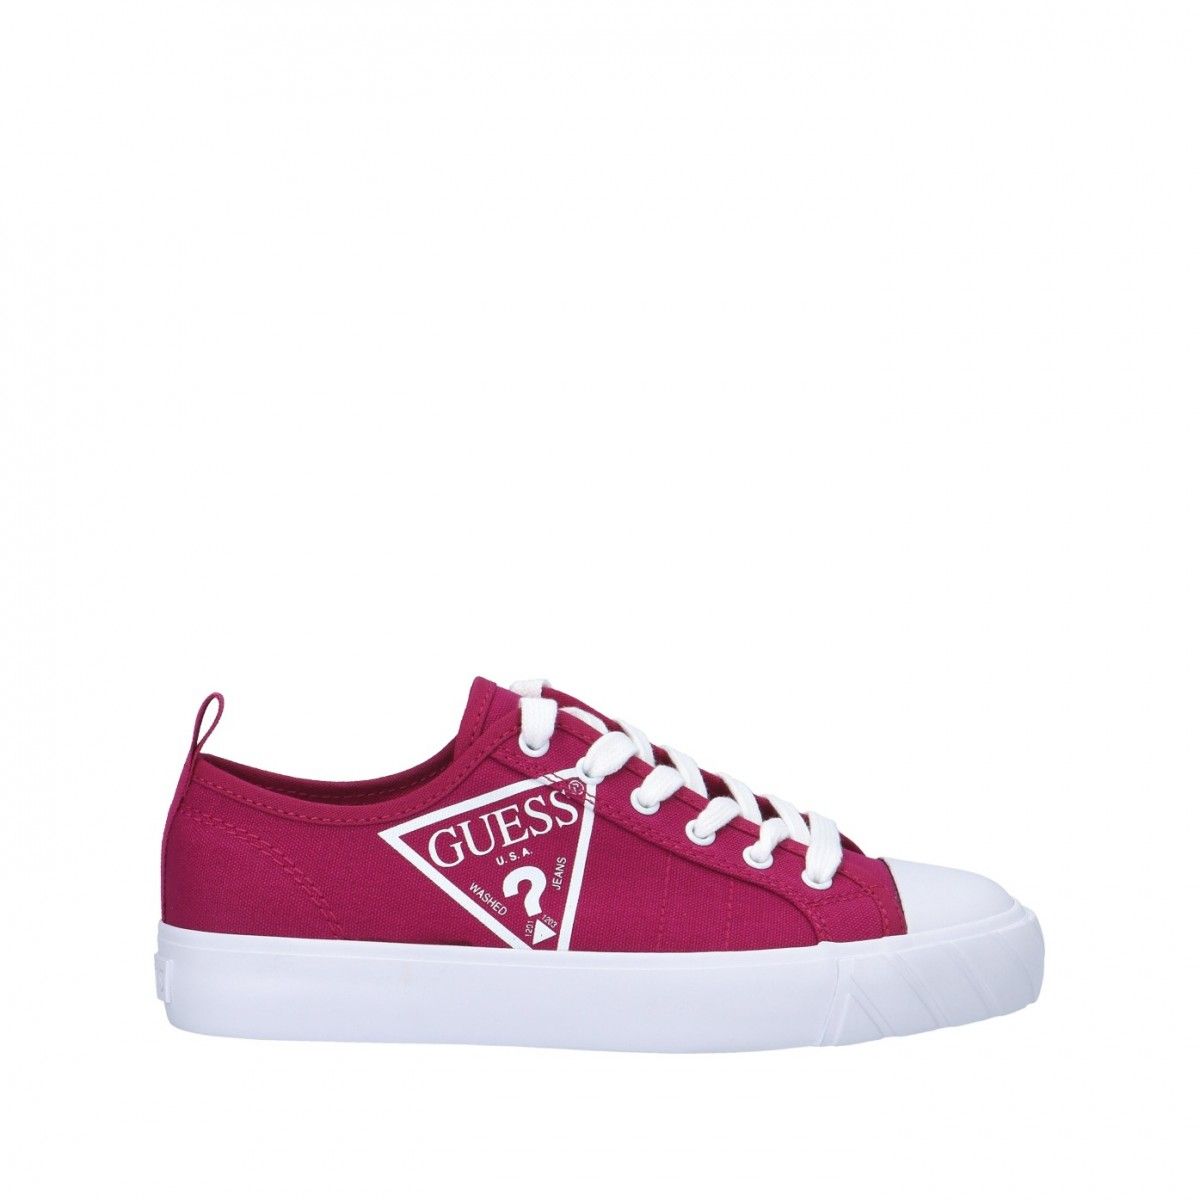 Guess Sneaker Fuxia Gomma...